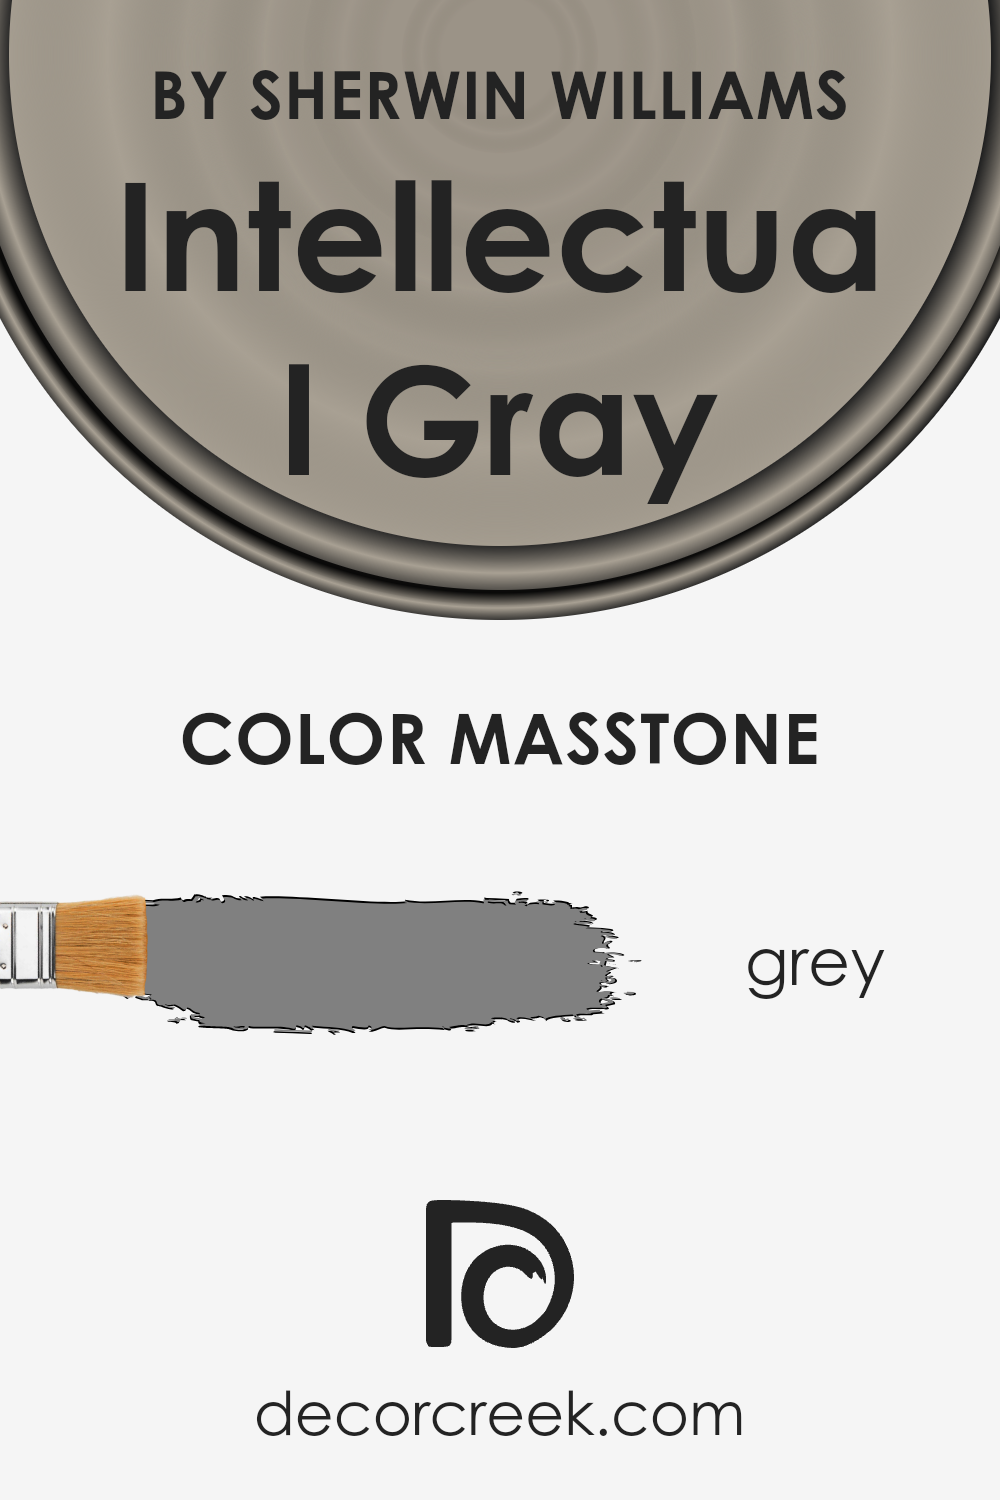 what_is_the_masstone_of_intellectual_gray_sw_7045